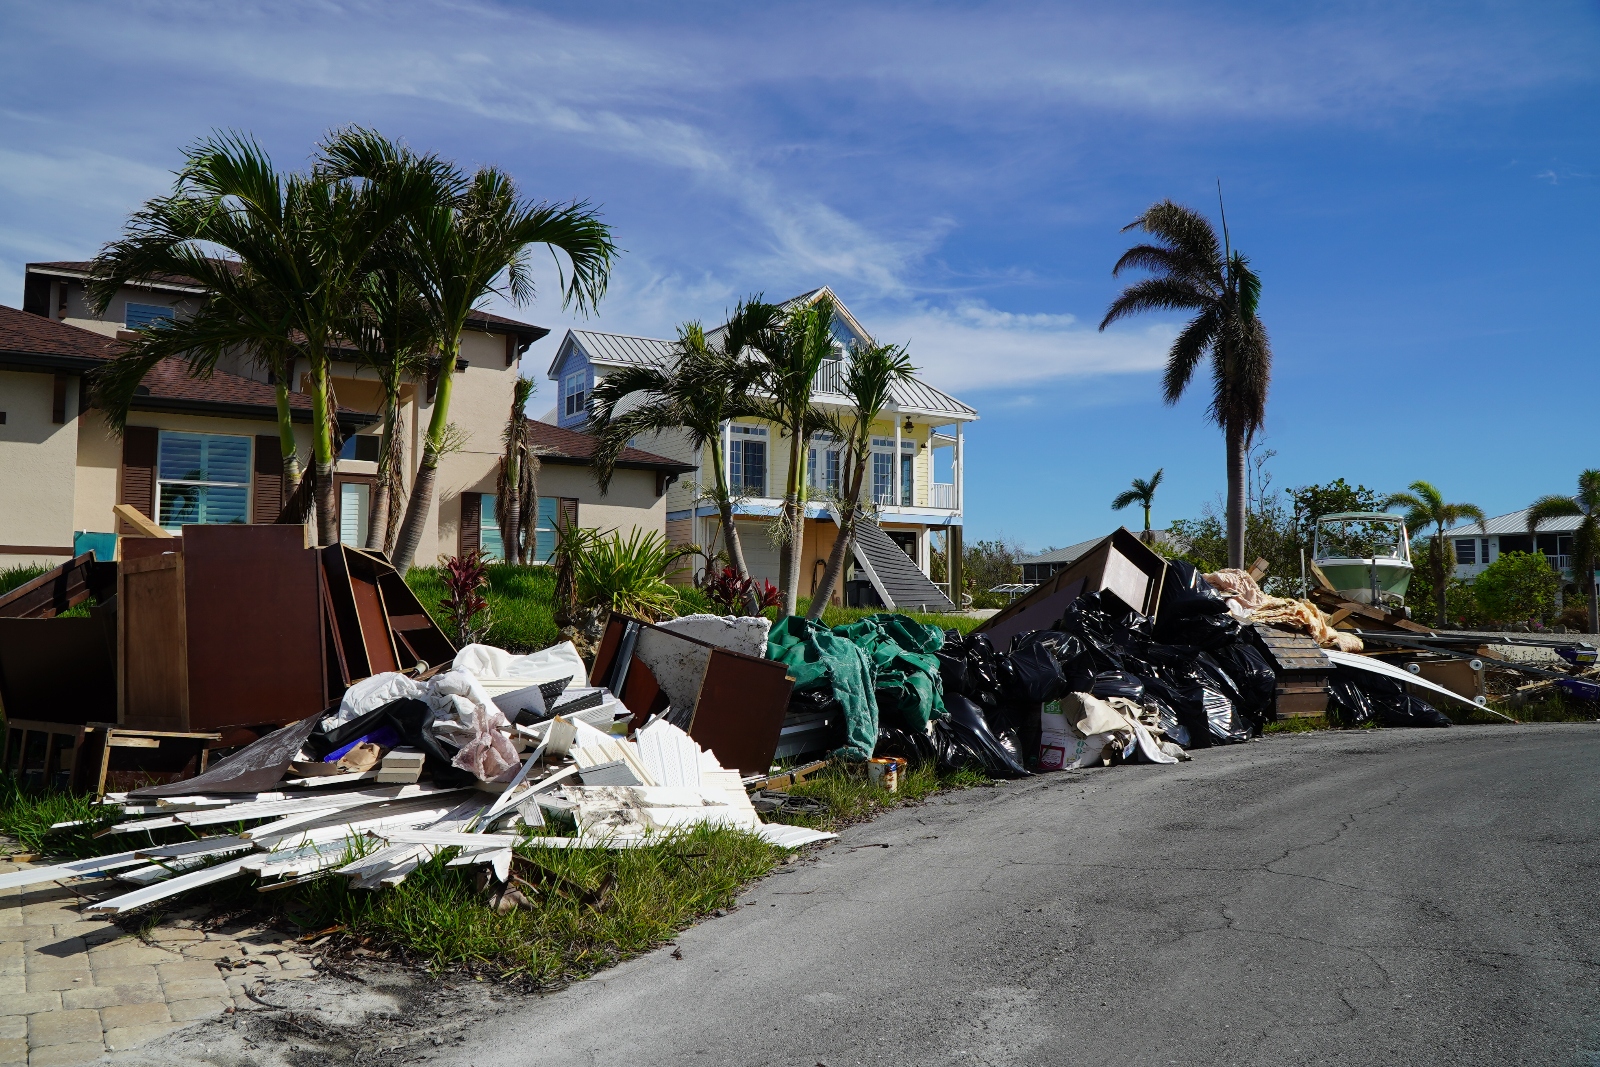 Piles of debris, including furniture, sit on the curb waiting to be picked up. A yellow building stands behind the debris – it was one of a few structures left standing in Fort Myers Beach after Hurricane Ian.